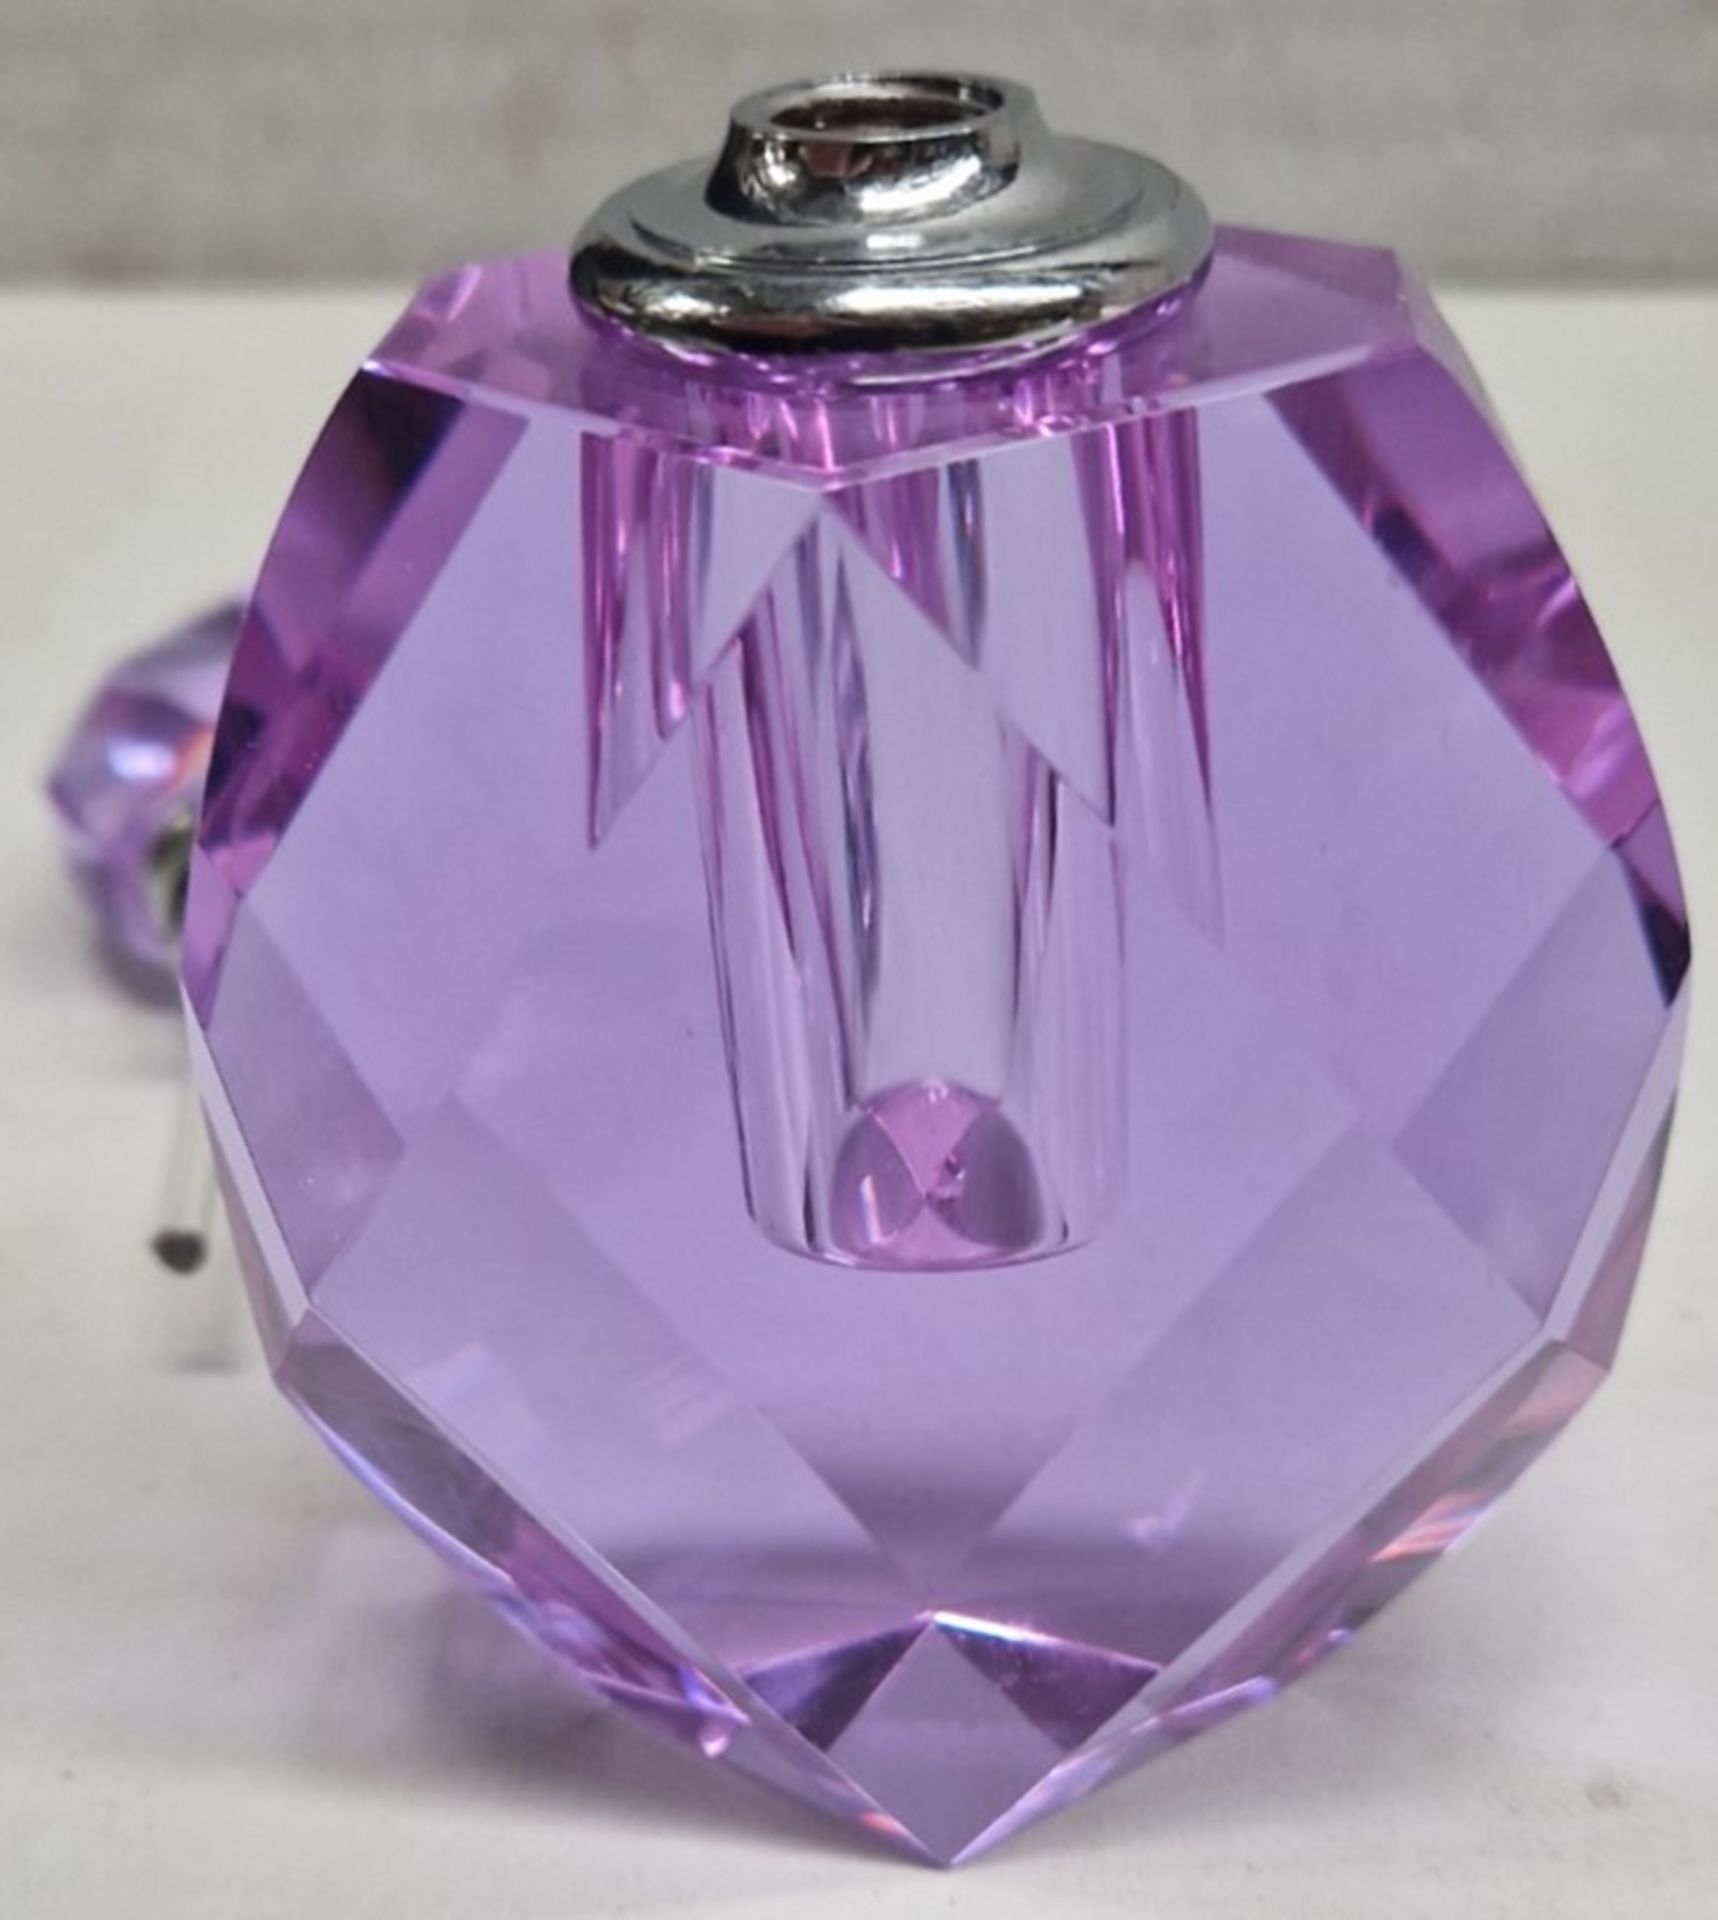 1 x Beautiful Purple Crystal Glass Perfume Bottle With Dauber And Threaded Stopper - Image 3 of 6